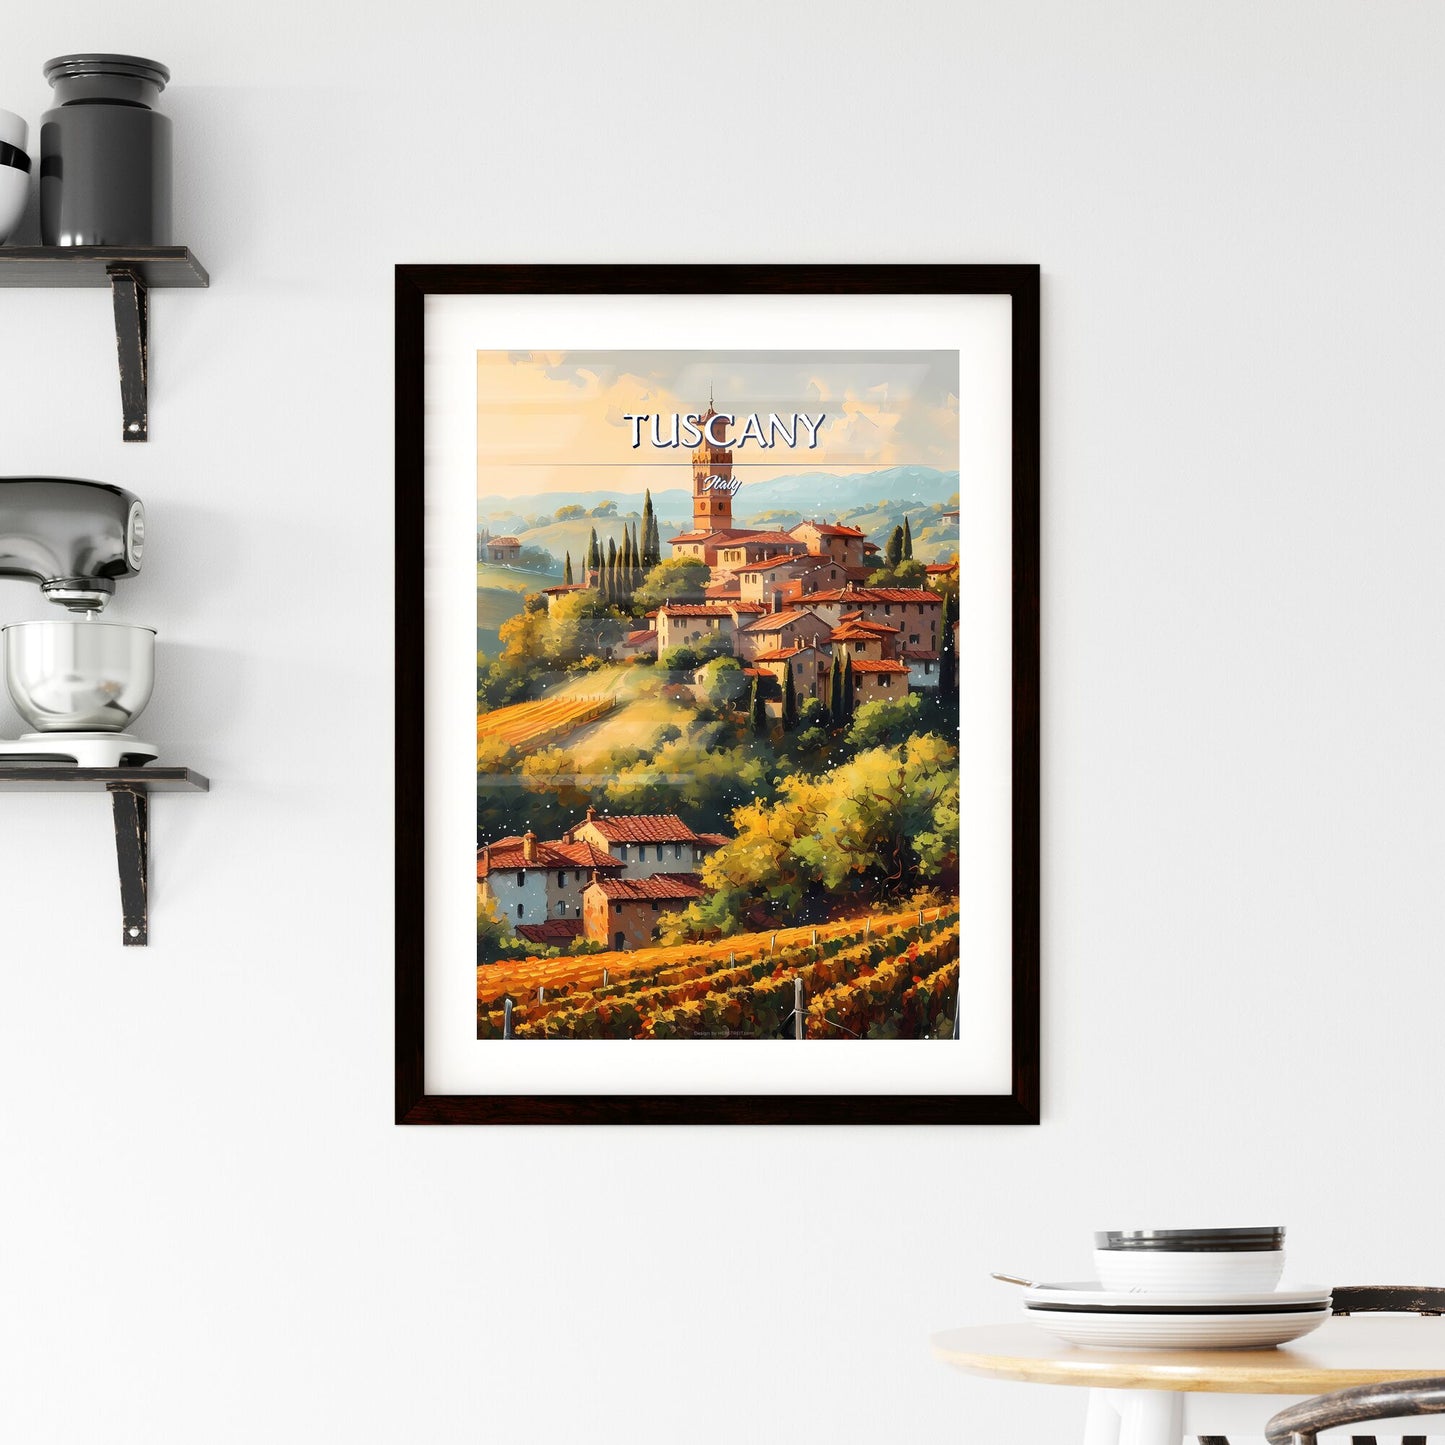 Tuscany, Italy - Art print of a painting of a village on a hill Default Title